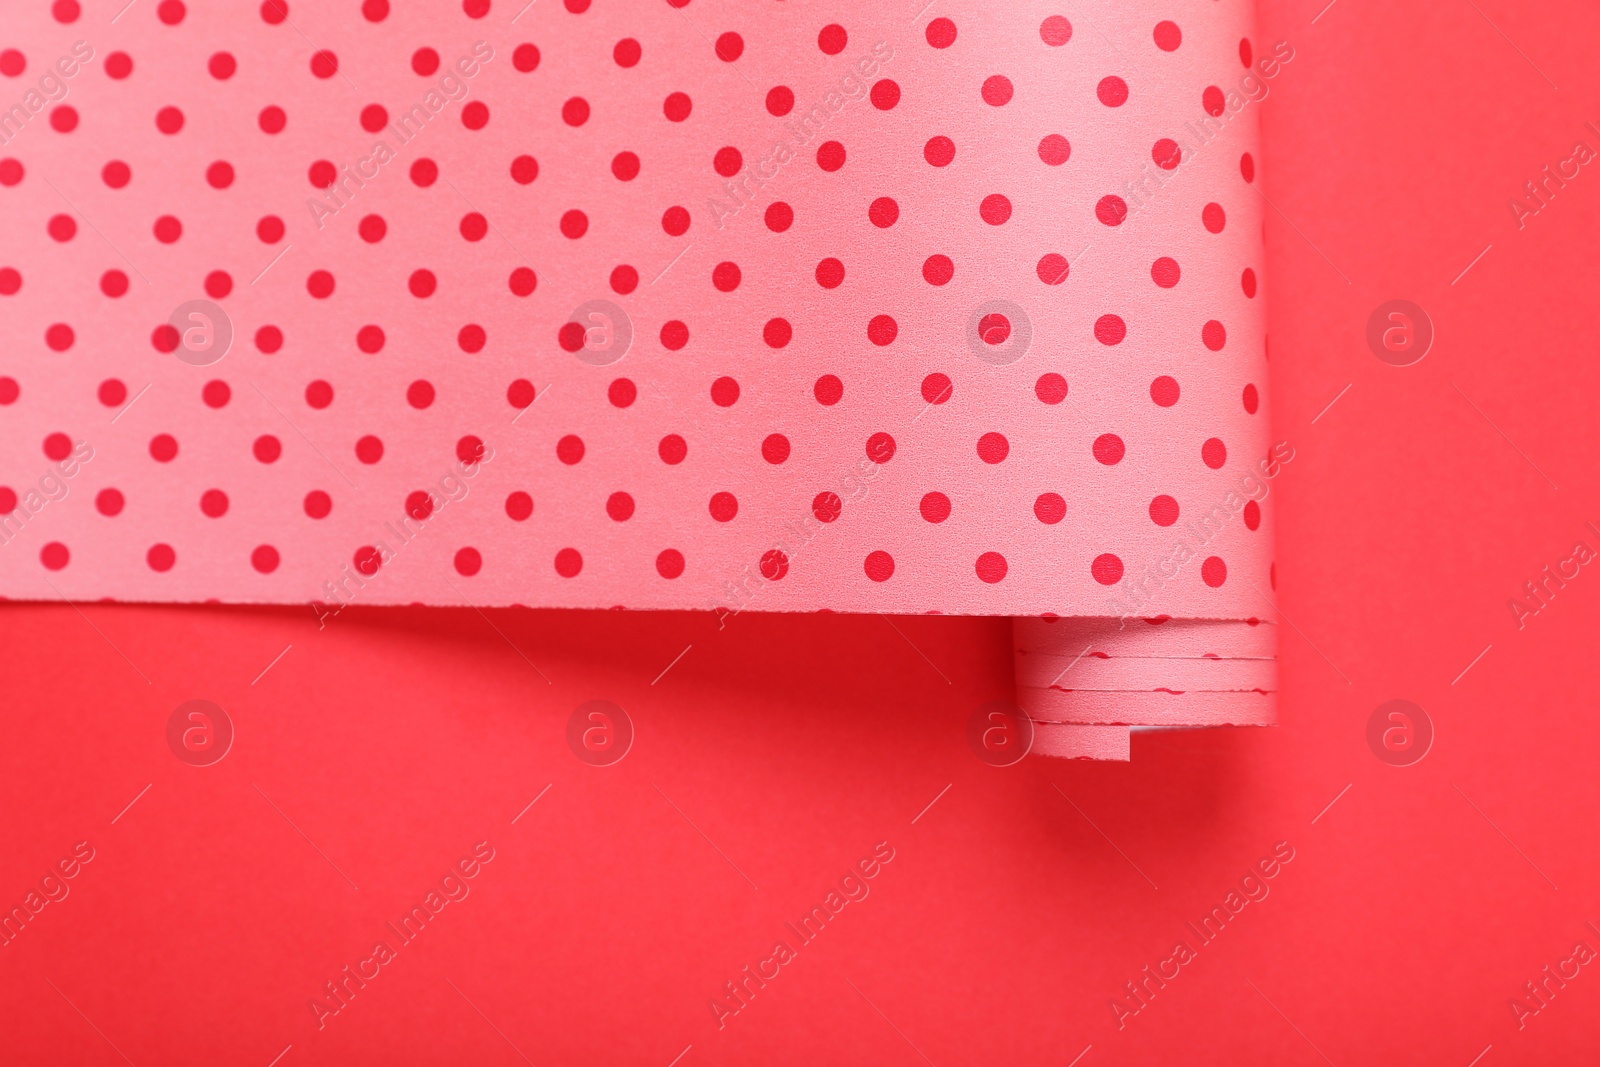 Photo of Roll of polka dot wrapping paper on red background, top view